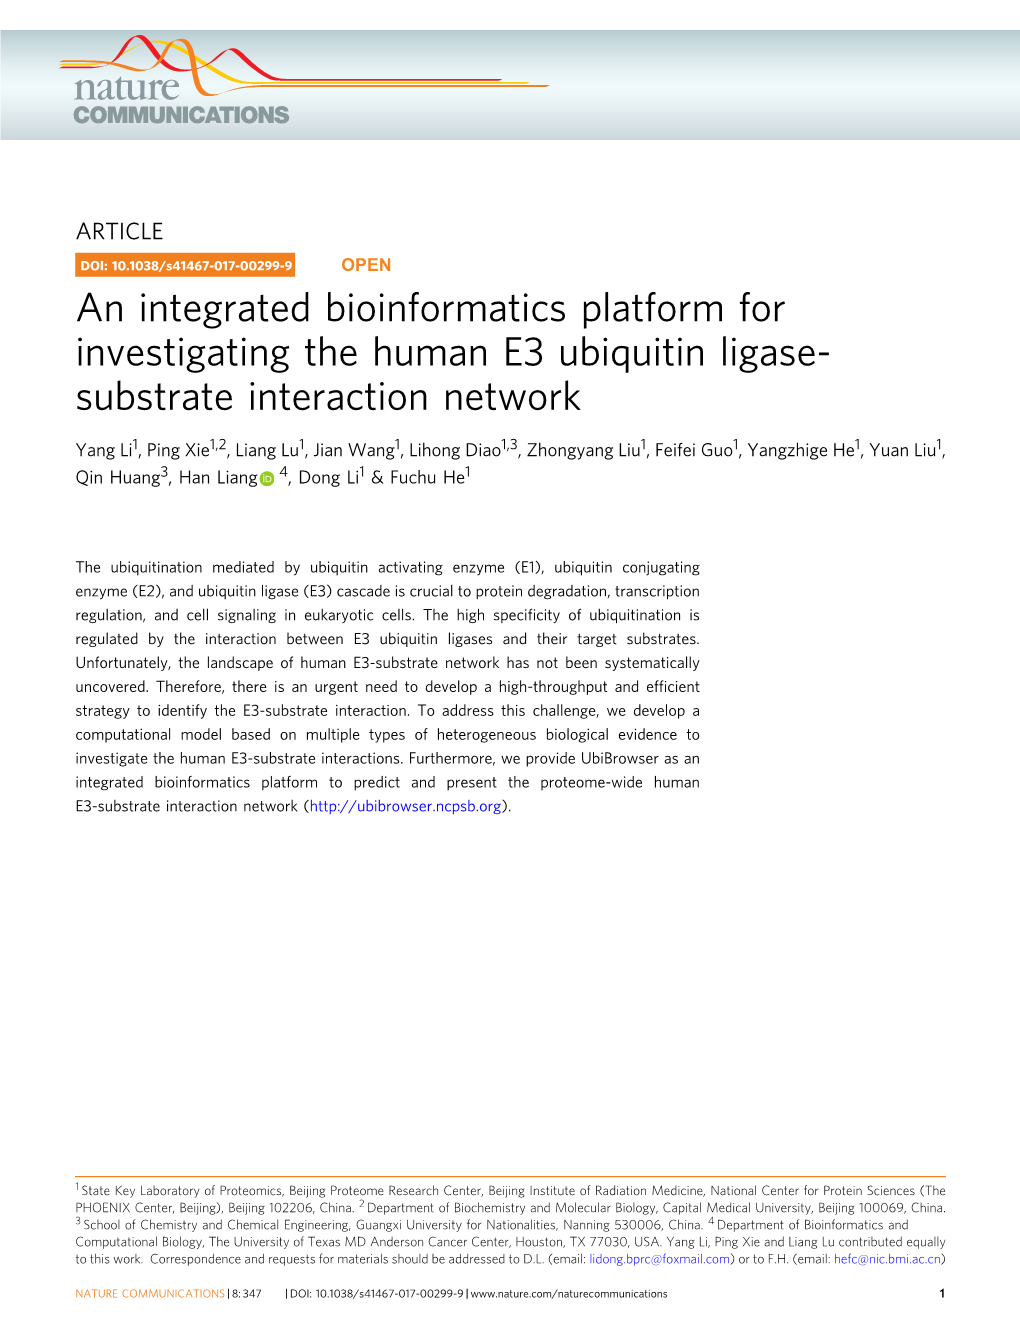 An Integrated Bioinformatics Platform for Investigating the Human E3 Ubiquitin Ligase-Substrate Interaction Network